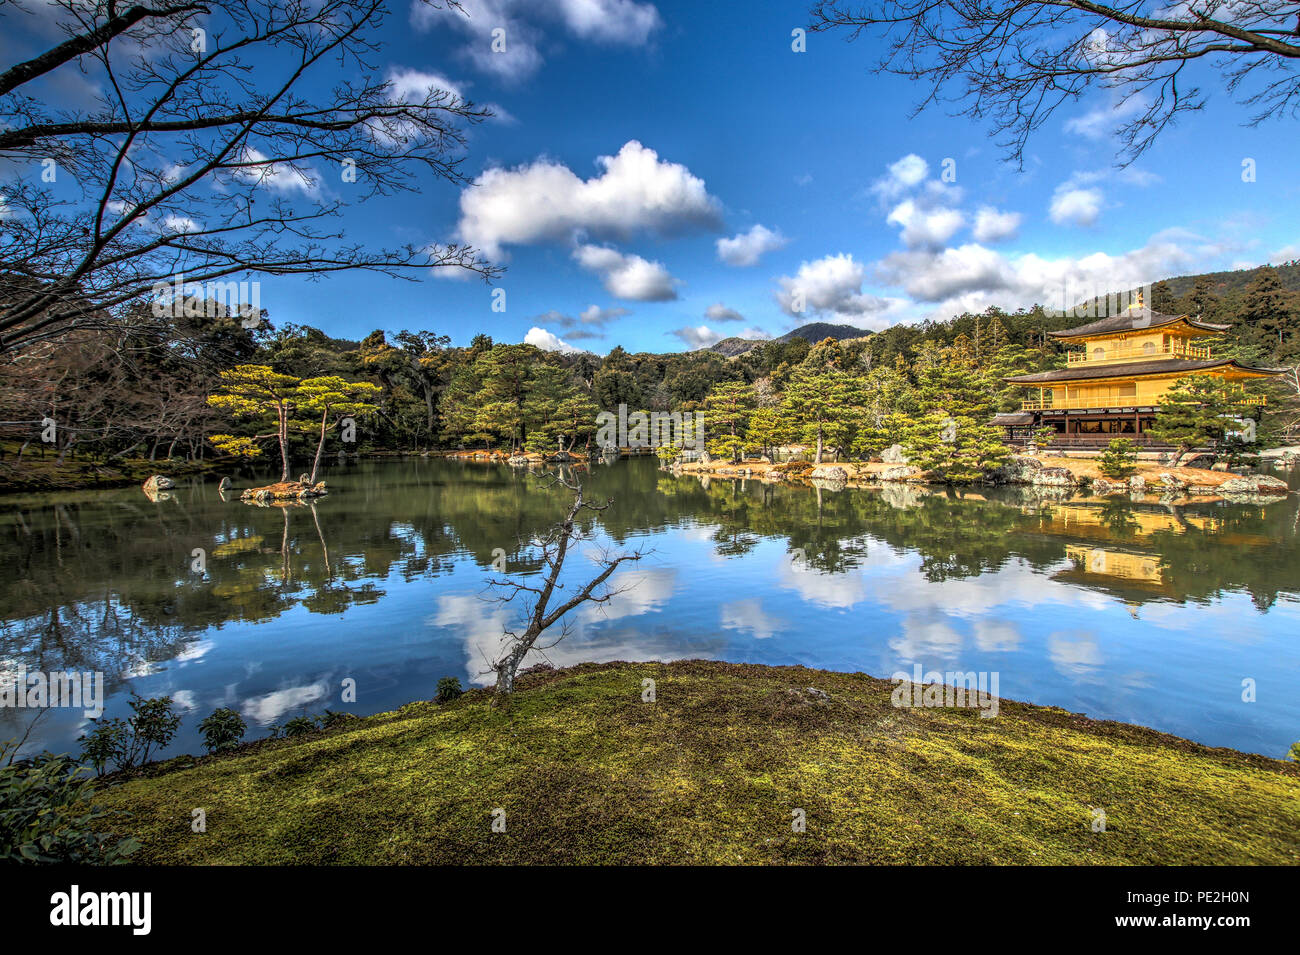 The famous Kinkaku-ji temple (金閣寺, Temple of the Golden Pavilion) with the Kyoko-chi pond in Kyoto in the winter of 2017. Stock Photo